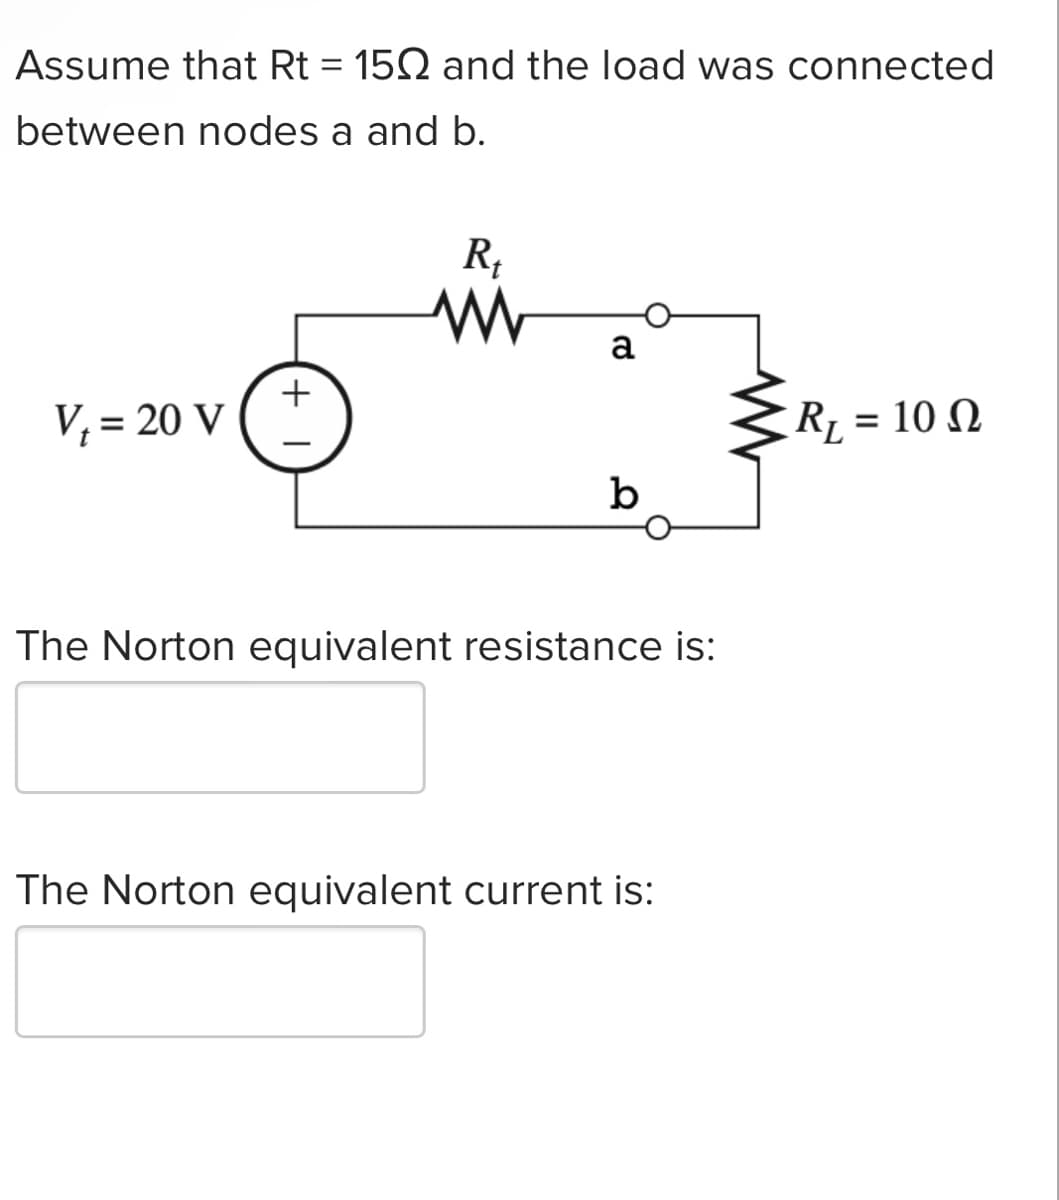 Assume that Rt = 150 and the load was connected
between nodes a and b.
V₁ = 20 V
+
R₁
ww
a
b
The Norton equivalent resistance is:
The Norton equivalent current is:
R₁ = 10 Q